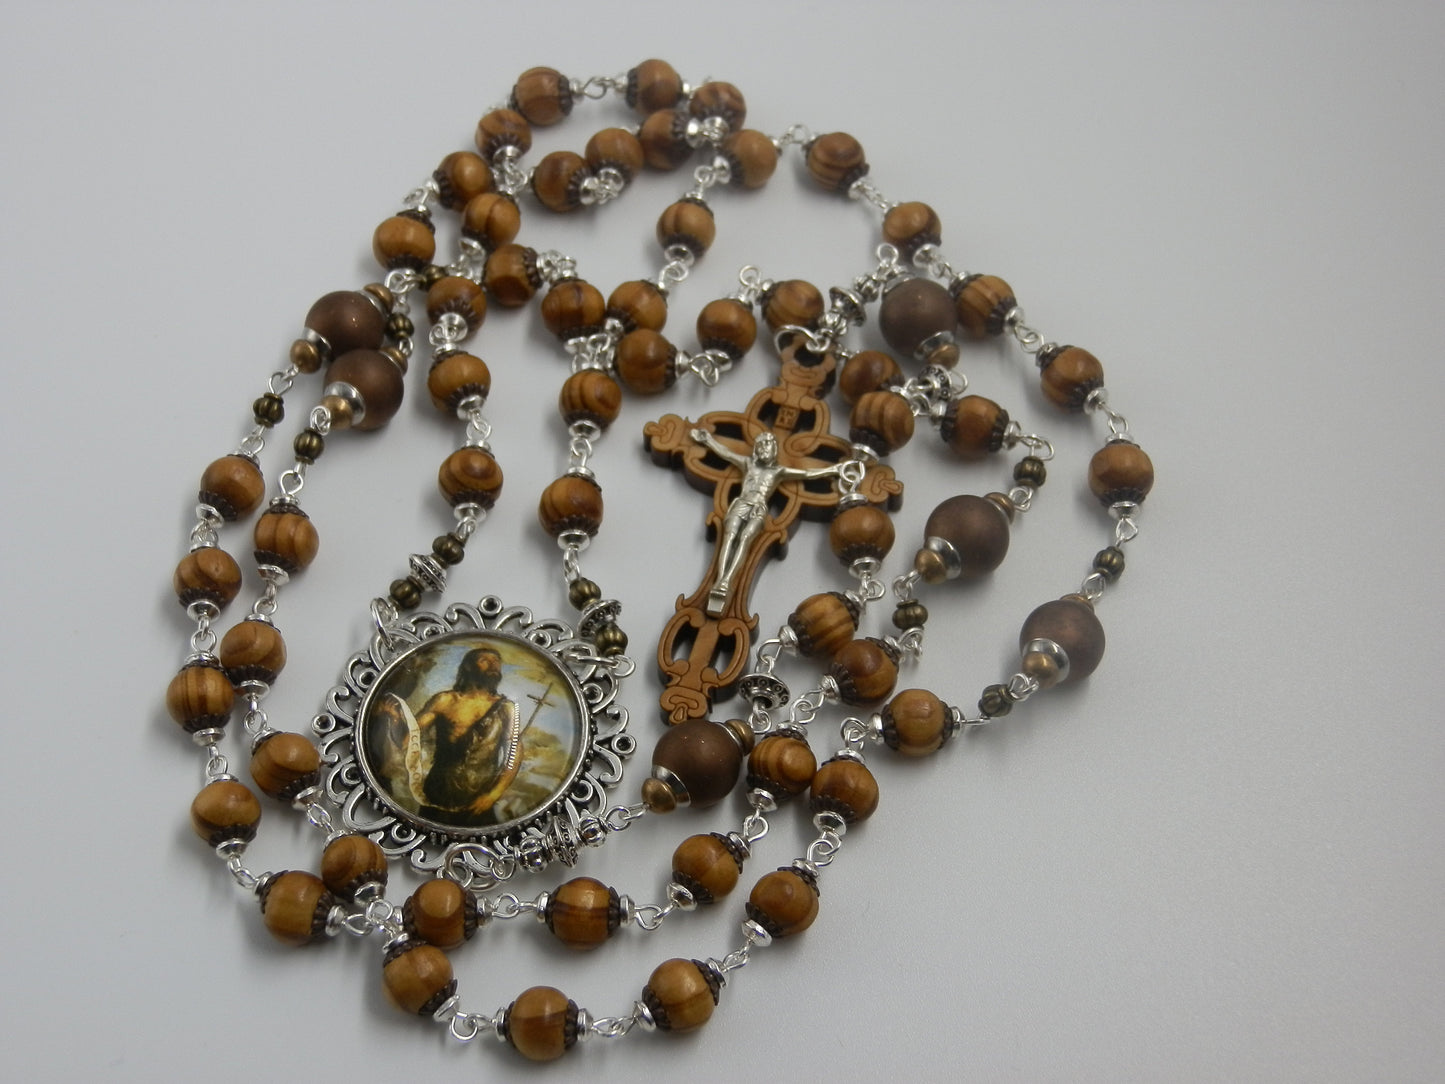 John the Baptist Rosaries, Wooden Rosary beads, Olive wood Crucifix, St. John Rosary beads, Vintage style rosary beads, Men's Rosaries.